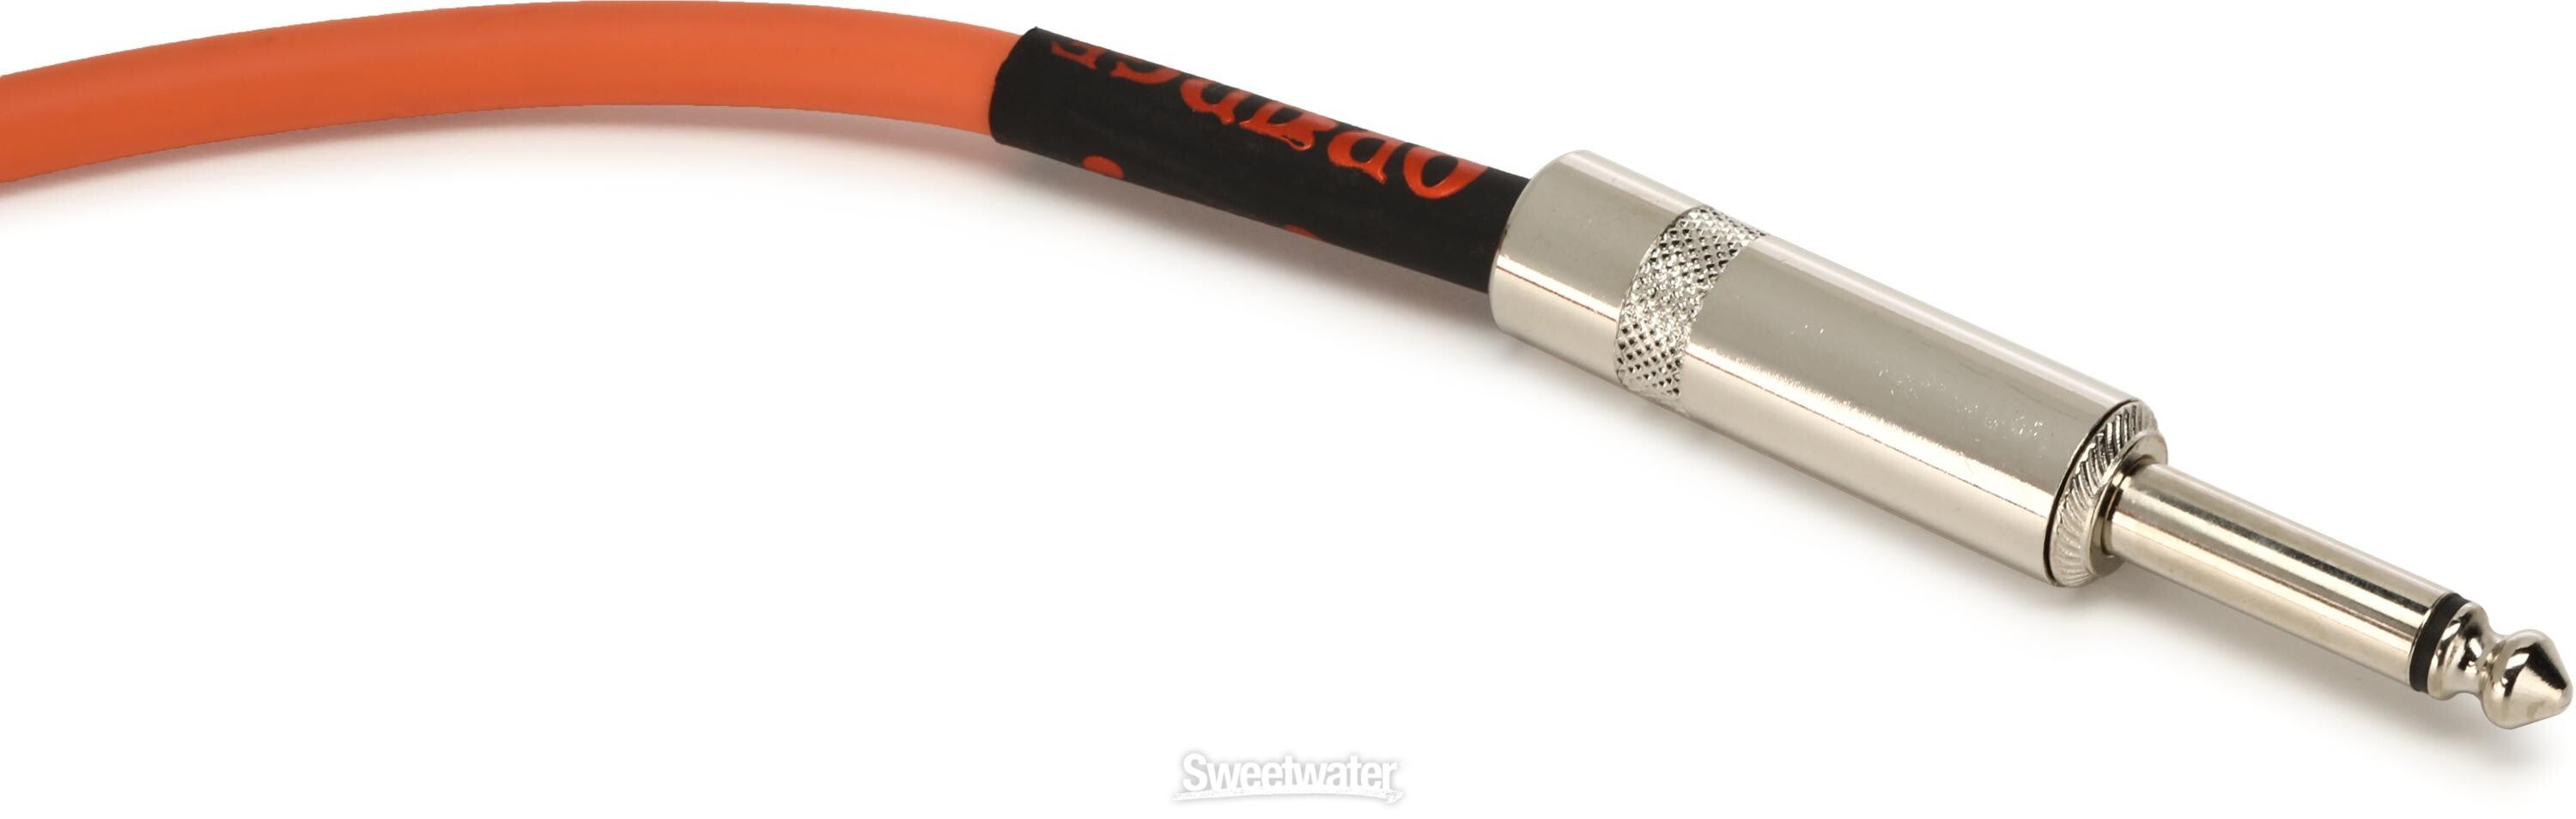 Orange CA037 Crush Straight to Right Angle Instrument Cable - 20 Foot |  Sweetwater